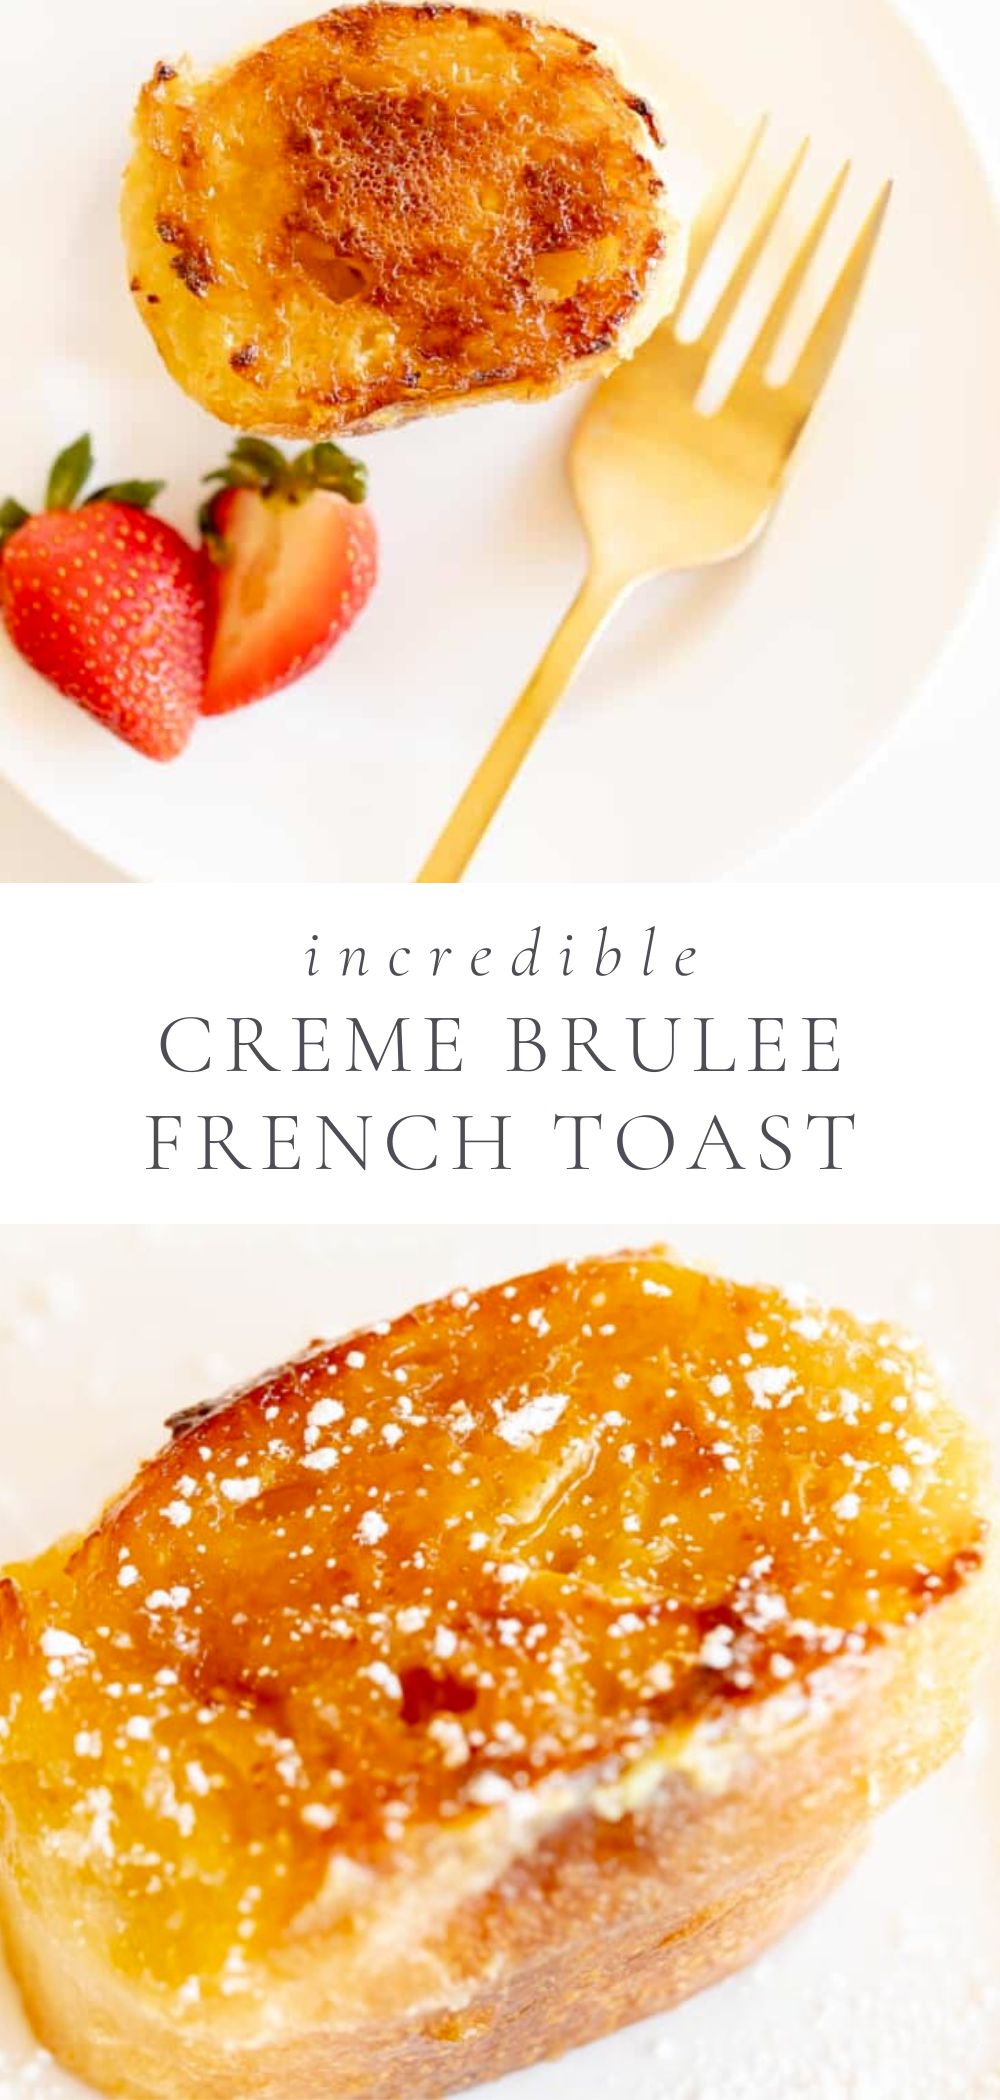 Creme Brulee French Toast is plated on a white plate